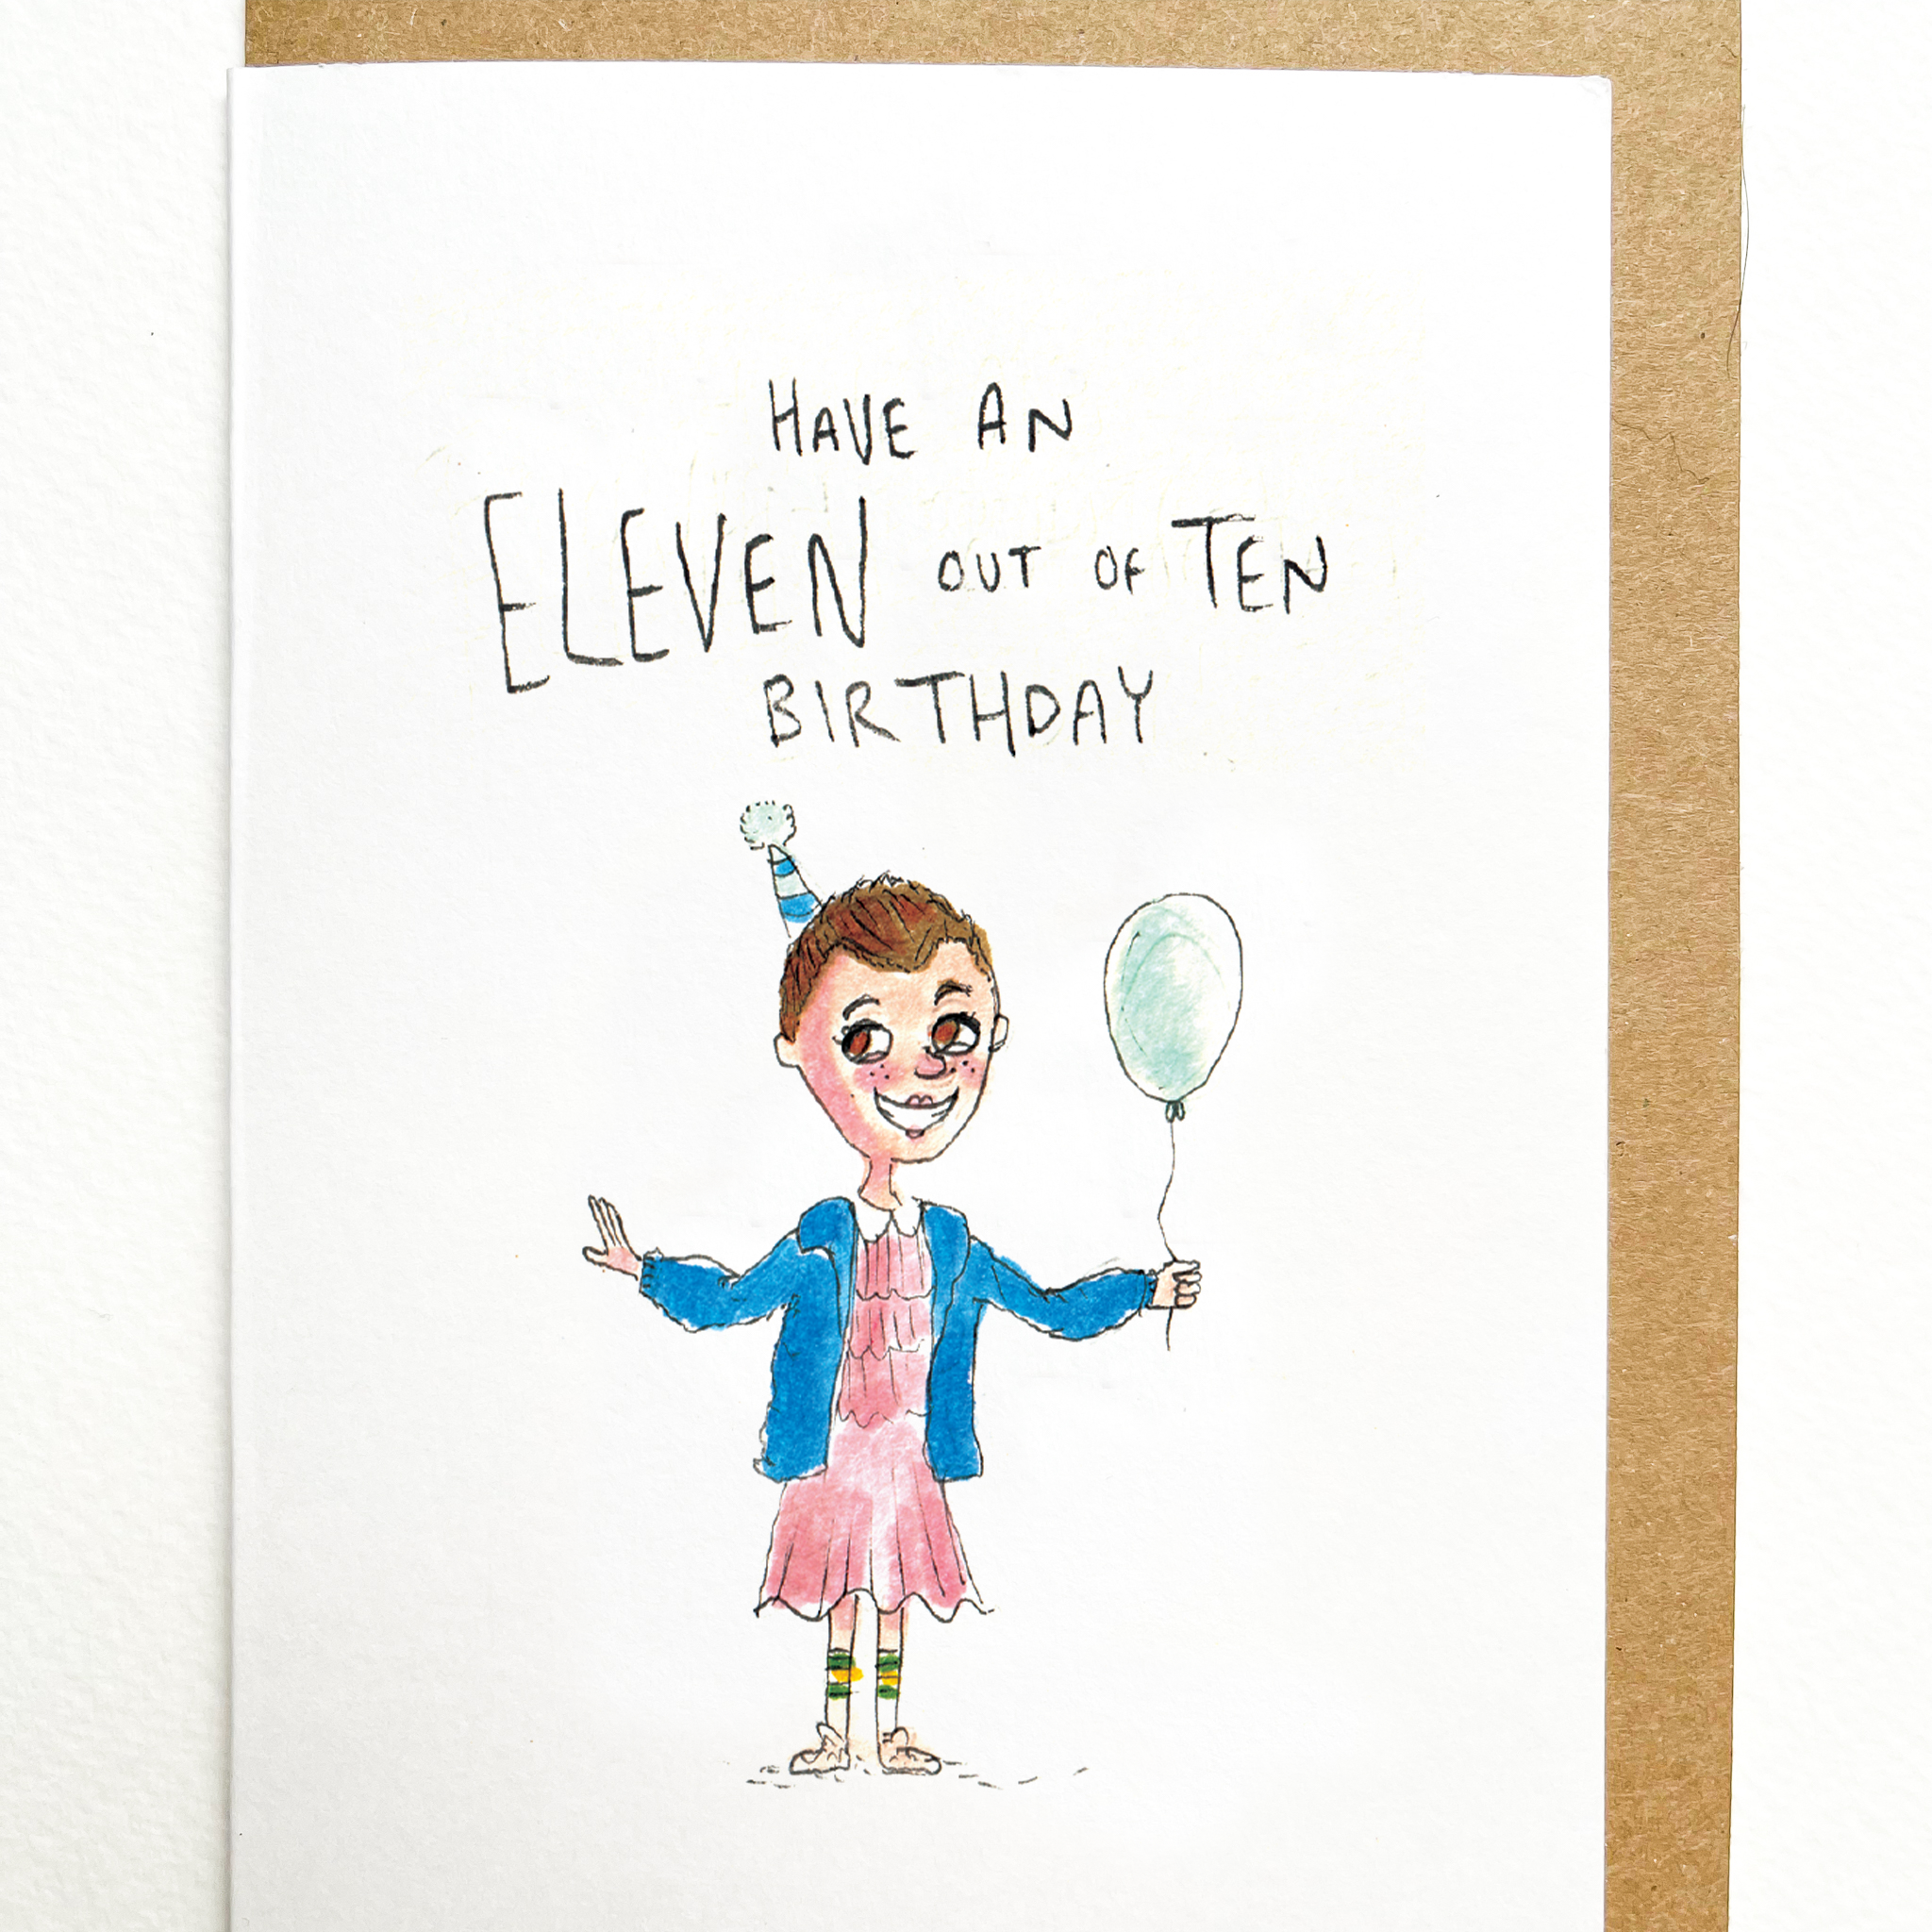 Have an Eleven out of Ten Birthday